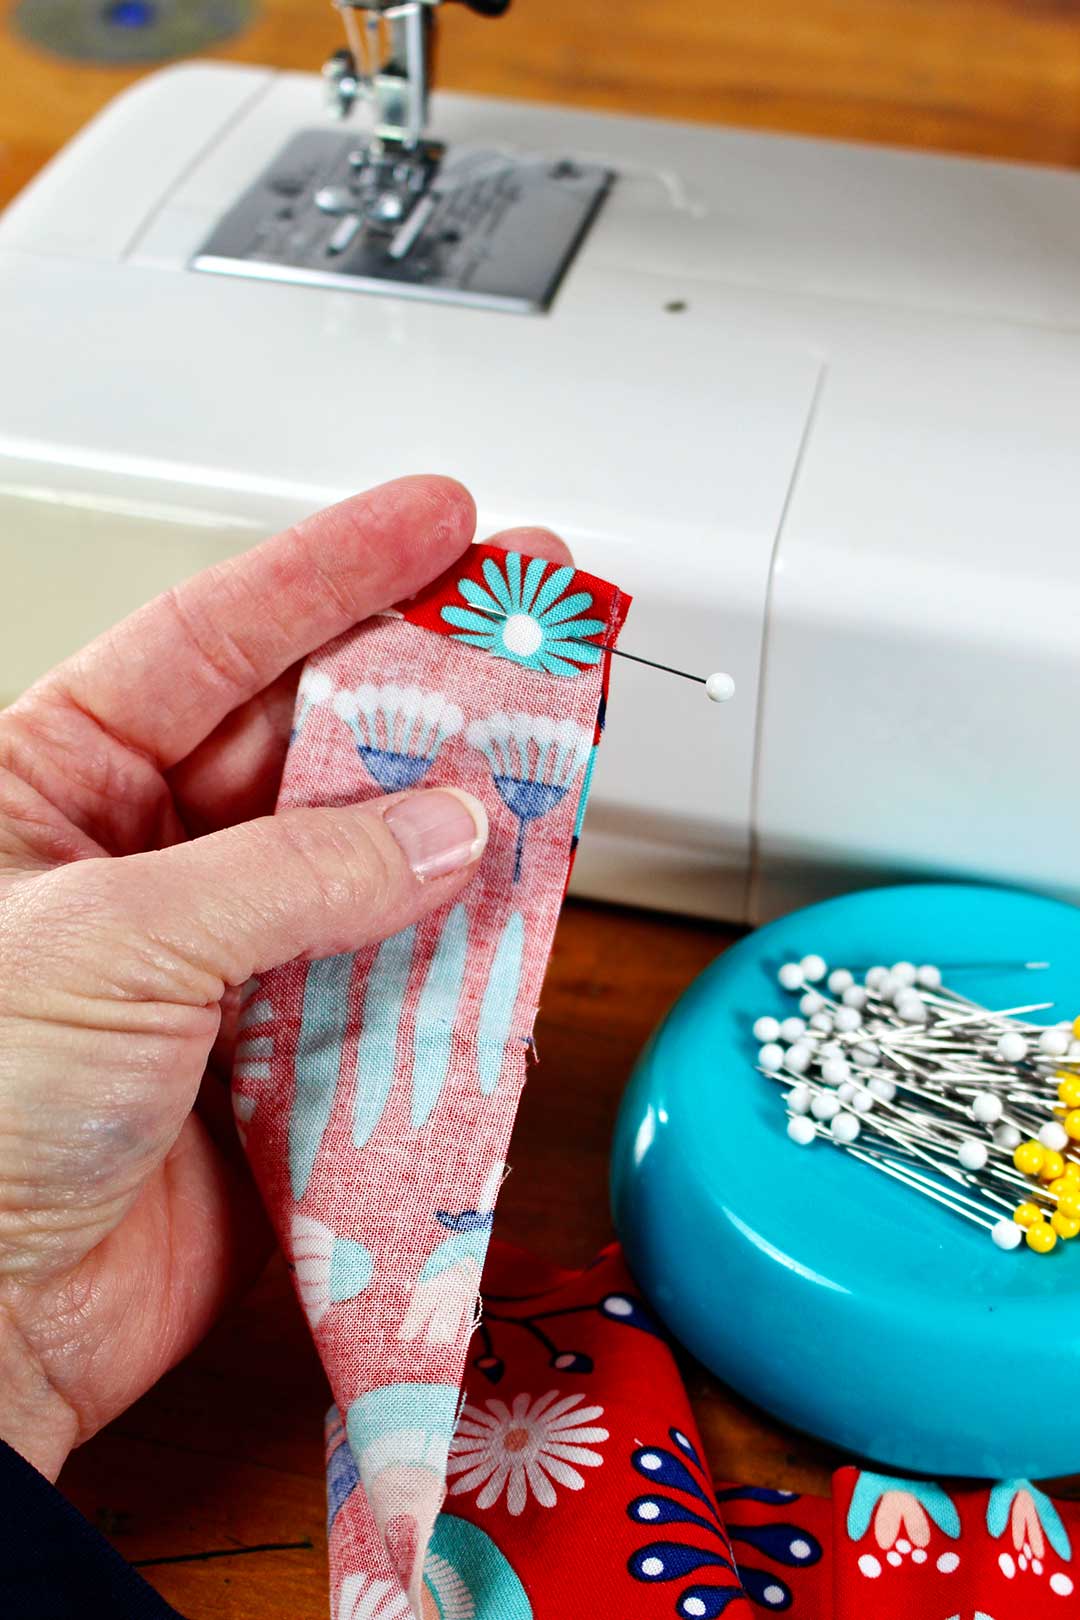 Straight pin holding edge of a strip of fabric for sewing. Sewing machine and straight pins nearby as person shows how to make a scrunchie.